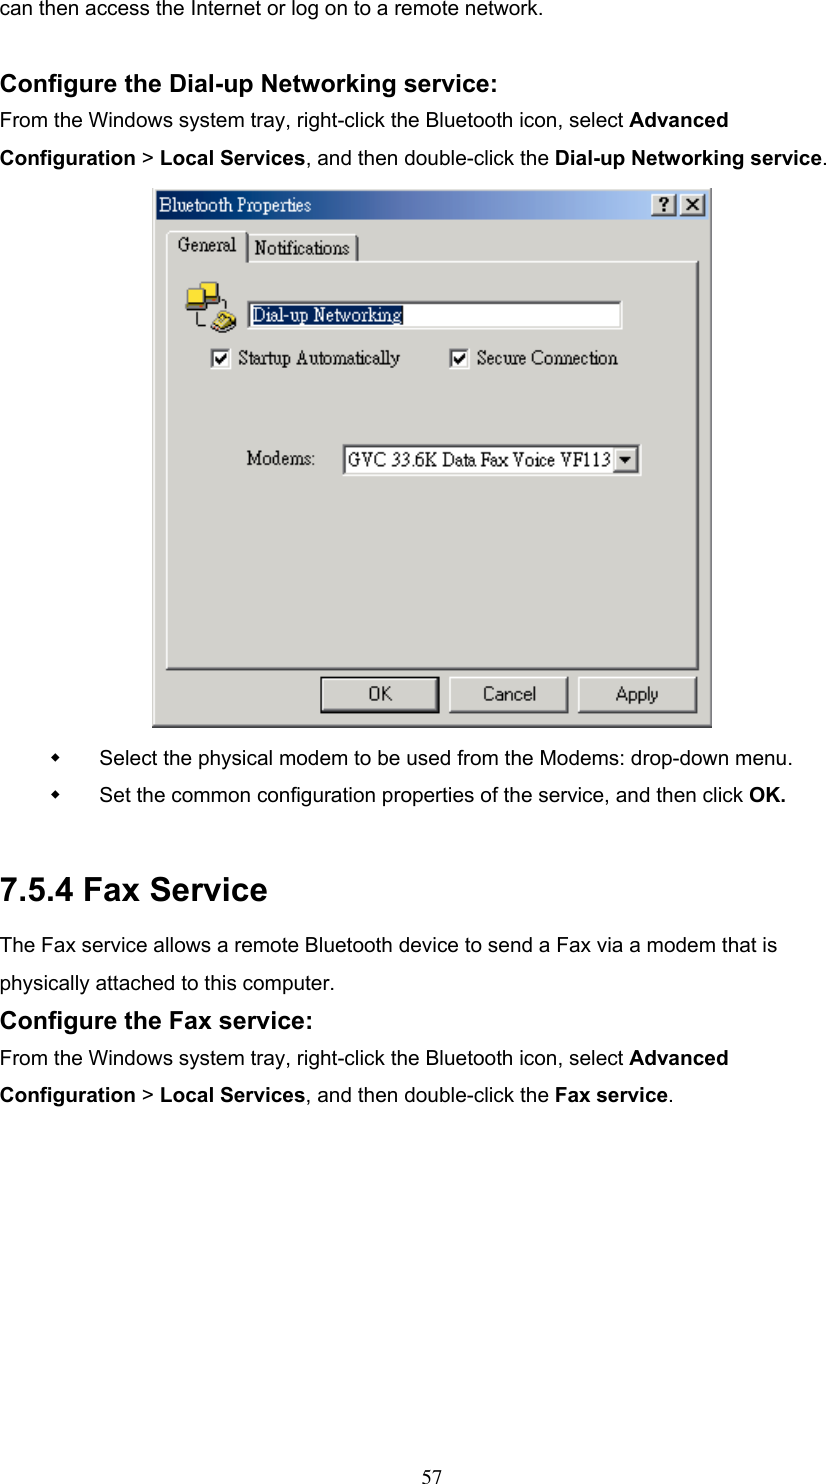 can then access the Internet or log on to a remote network.  Configure the Dial-up Networking service: From the Windows system tray, right-click the Bluetooth icon, select Advanced Configuration &gt; Local Services, and then double-click the Dial-up Networking service.    Select the physical modem to be used from the Modems: drop-down menu.   Set the common configuration properties of the service, and then click OK.  7.5.4 Fax Service The Fax service allows a remote Bluetooth device to send a Fax via a modem that is physically attached to this computer. Configure the Fax service: From the Windows system tray, right-click the Bluetooth icon, select Advanced Configuration &gt; Local Services, and then double-click the Fax service.  57 